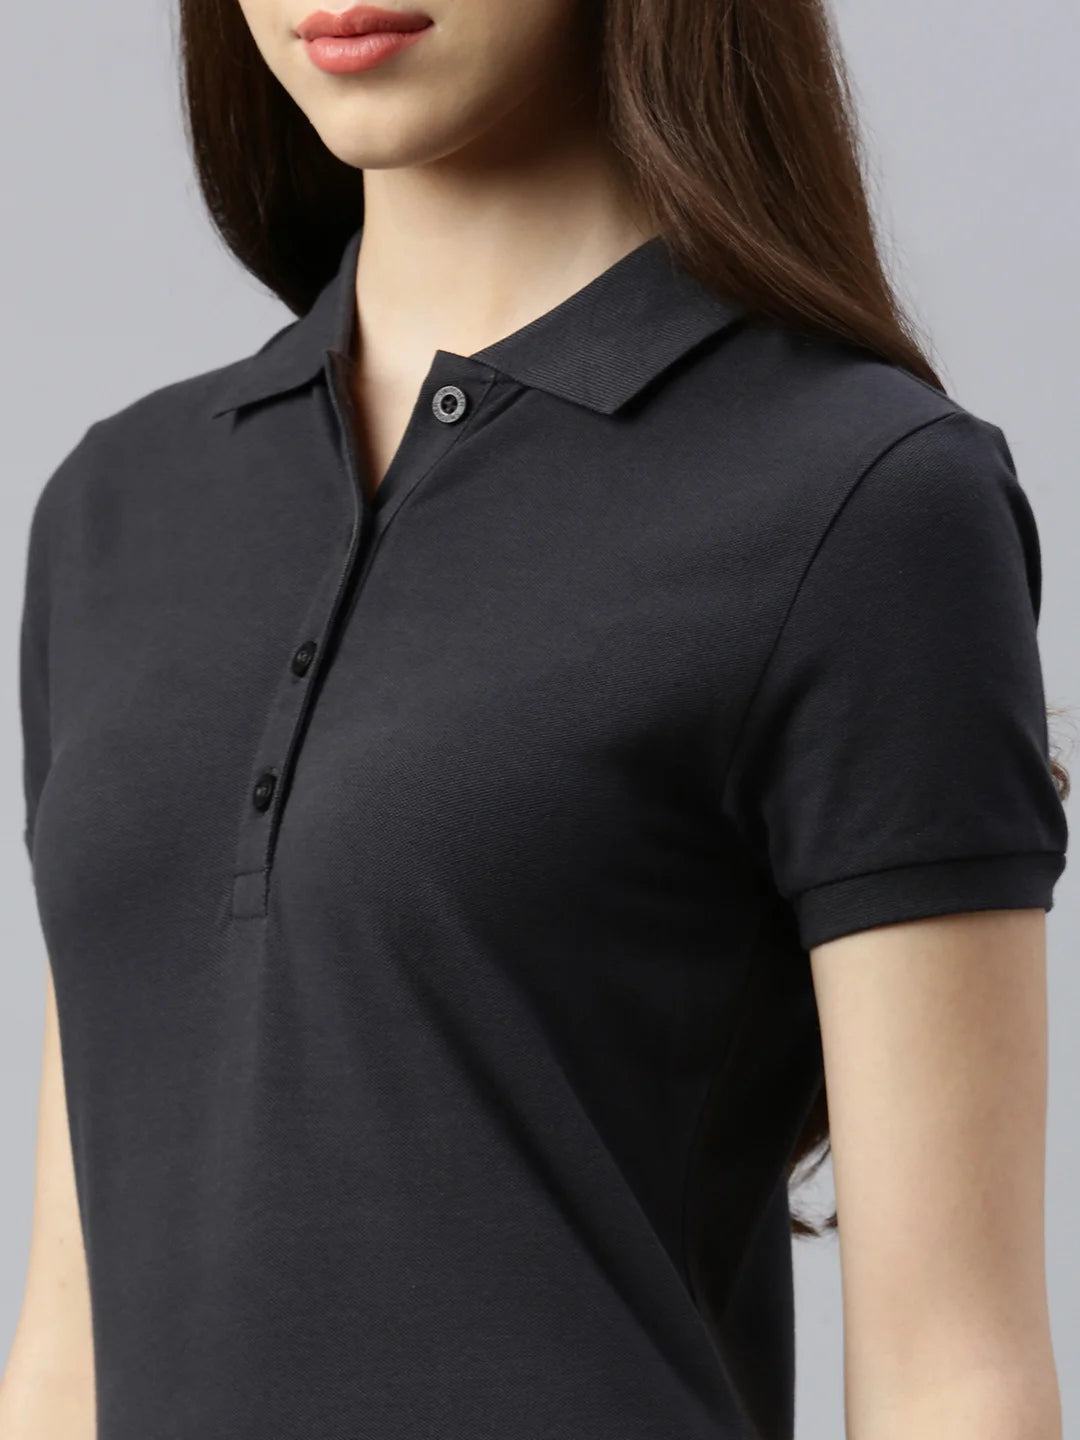 women-stacy-bio-fairtrade-polo-shirt-brilliant-hues-arsenic-zoom-in